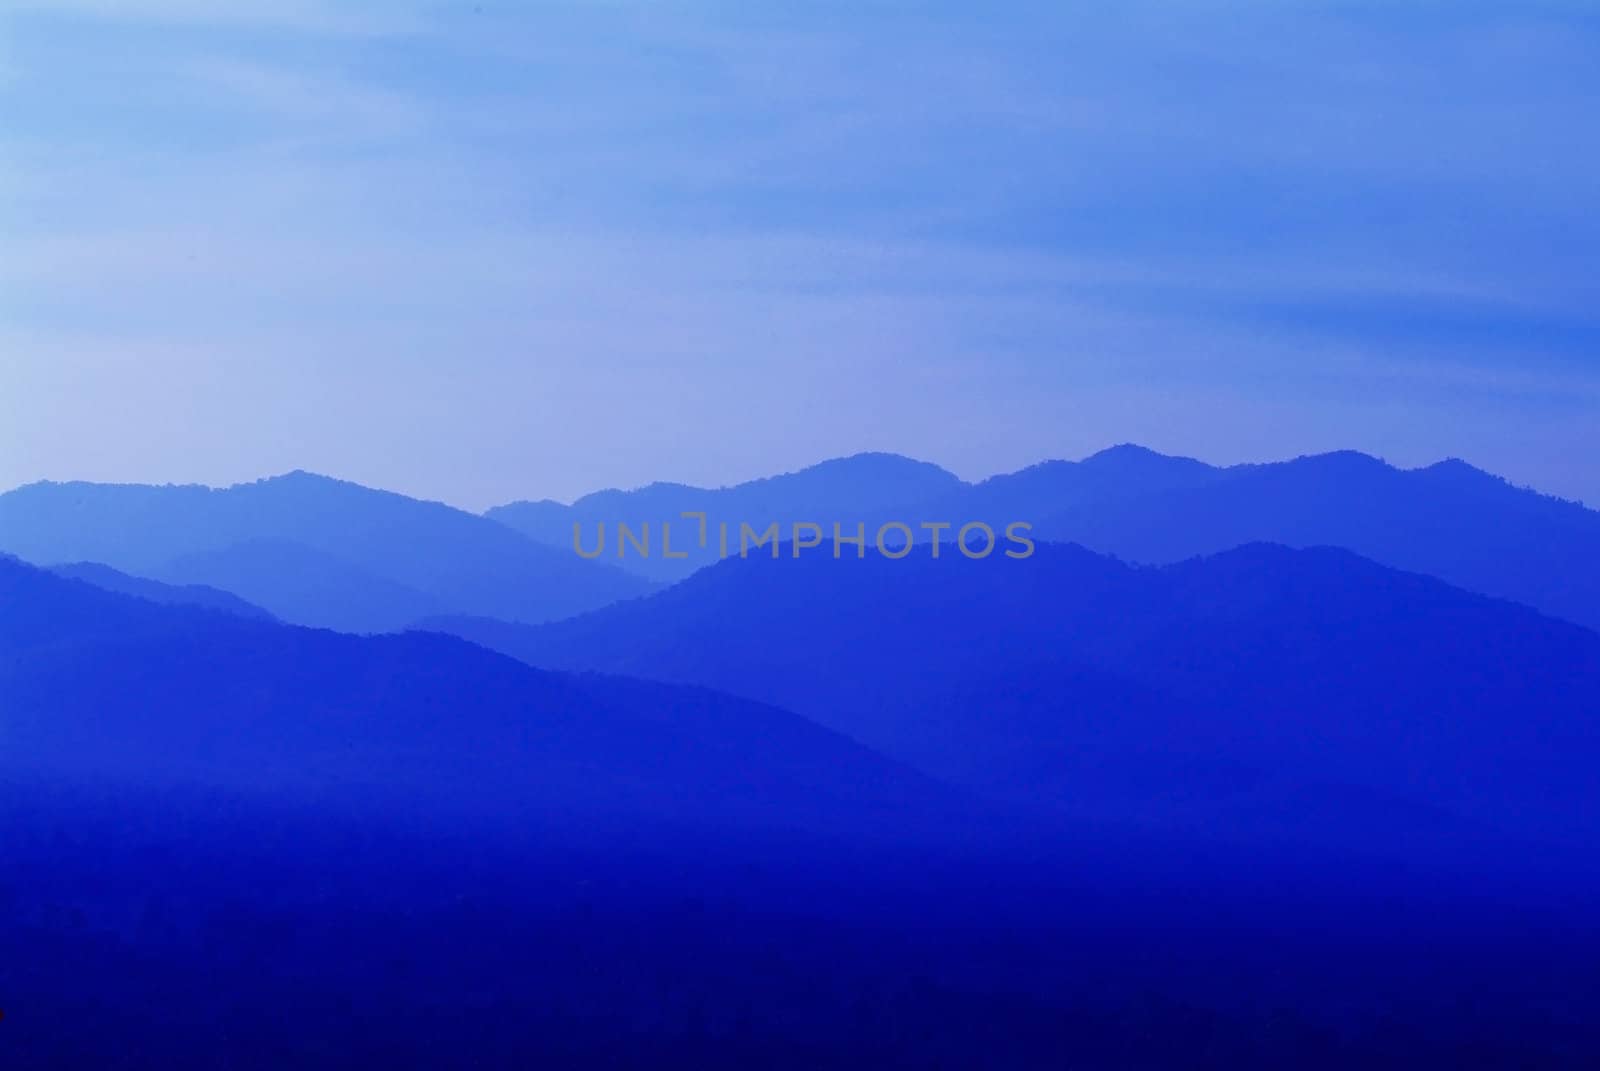 Abstract of mountains and hills at sunrise, in different shades of blue.